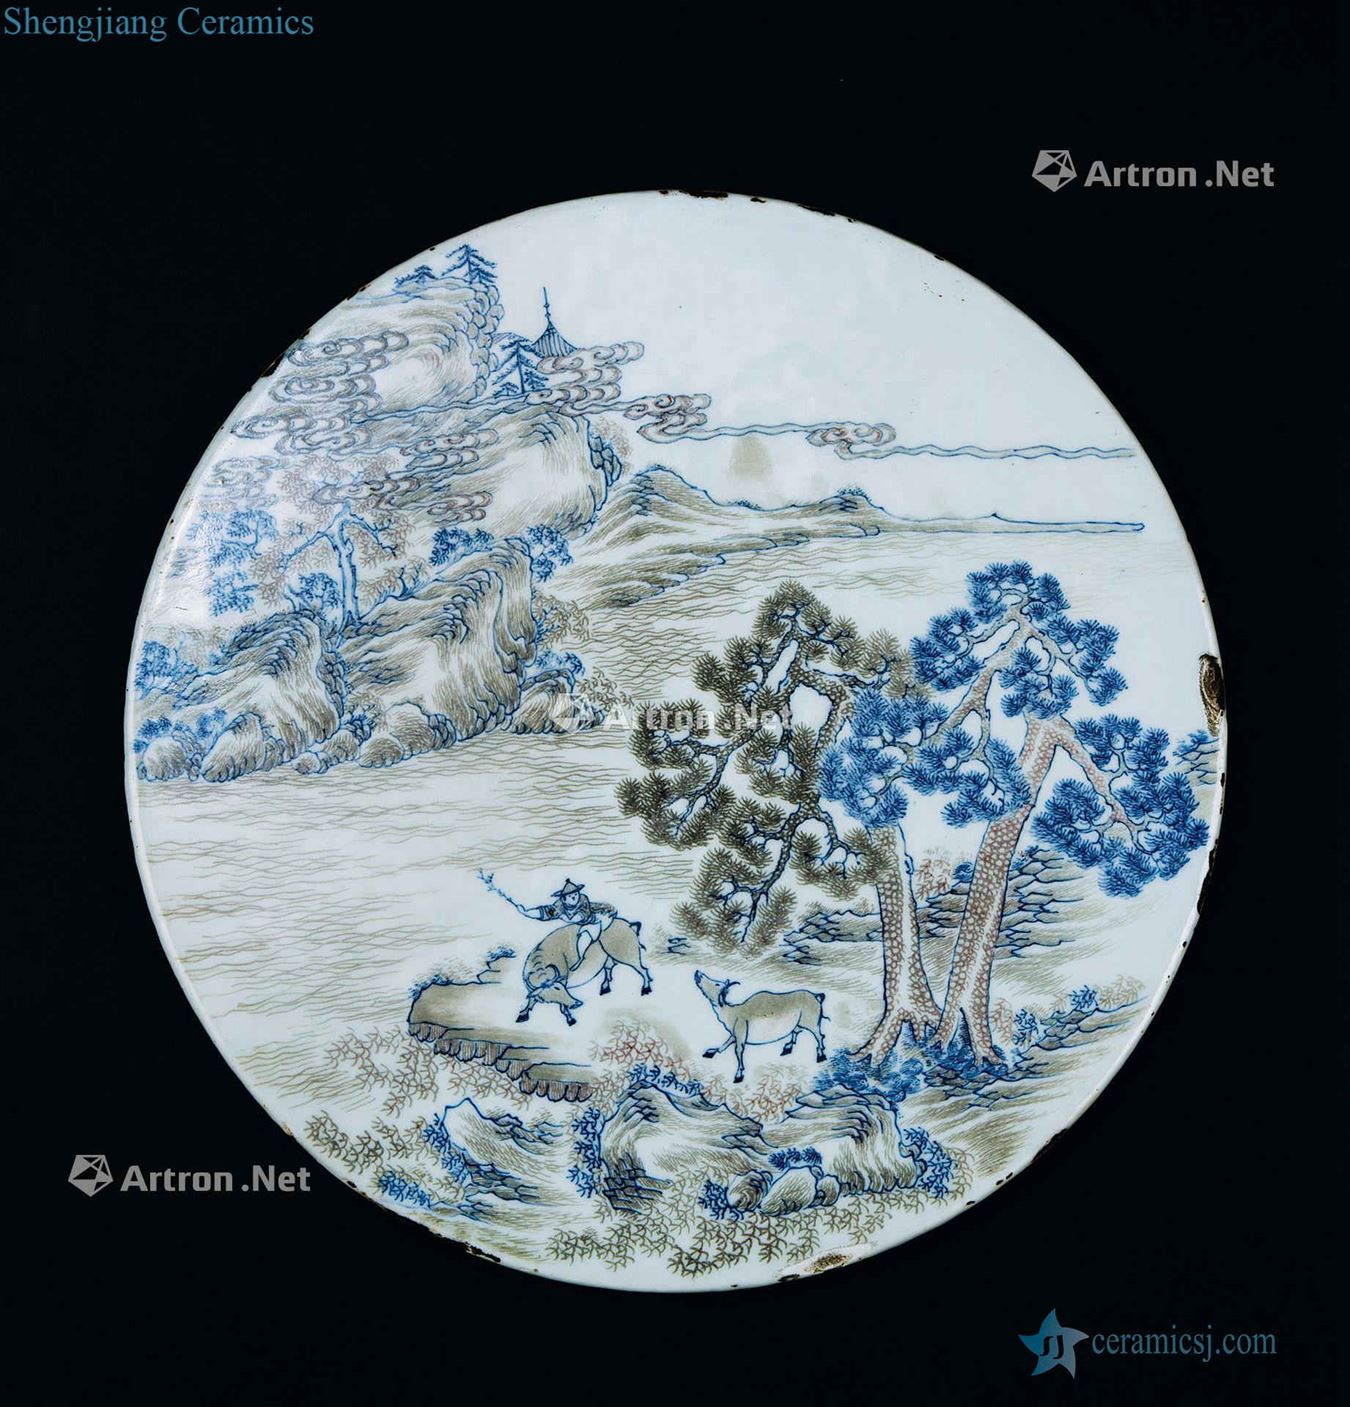 In the qing dynasty (1644-1911) blue and white porcelain plate youligong cattle grain